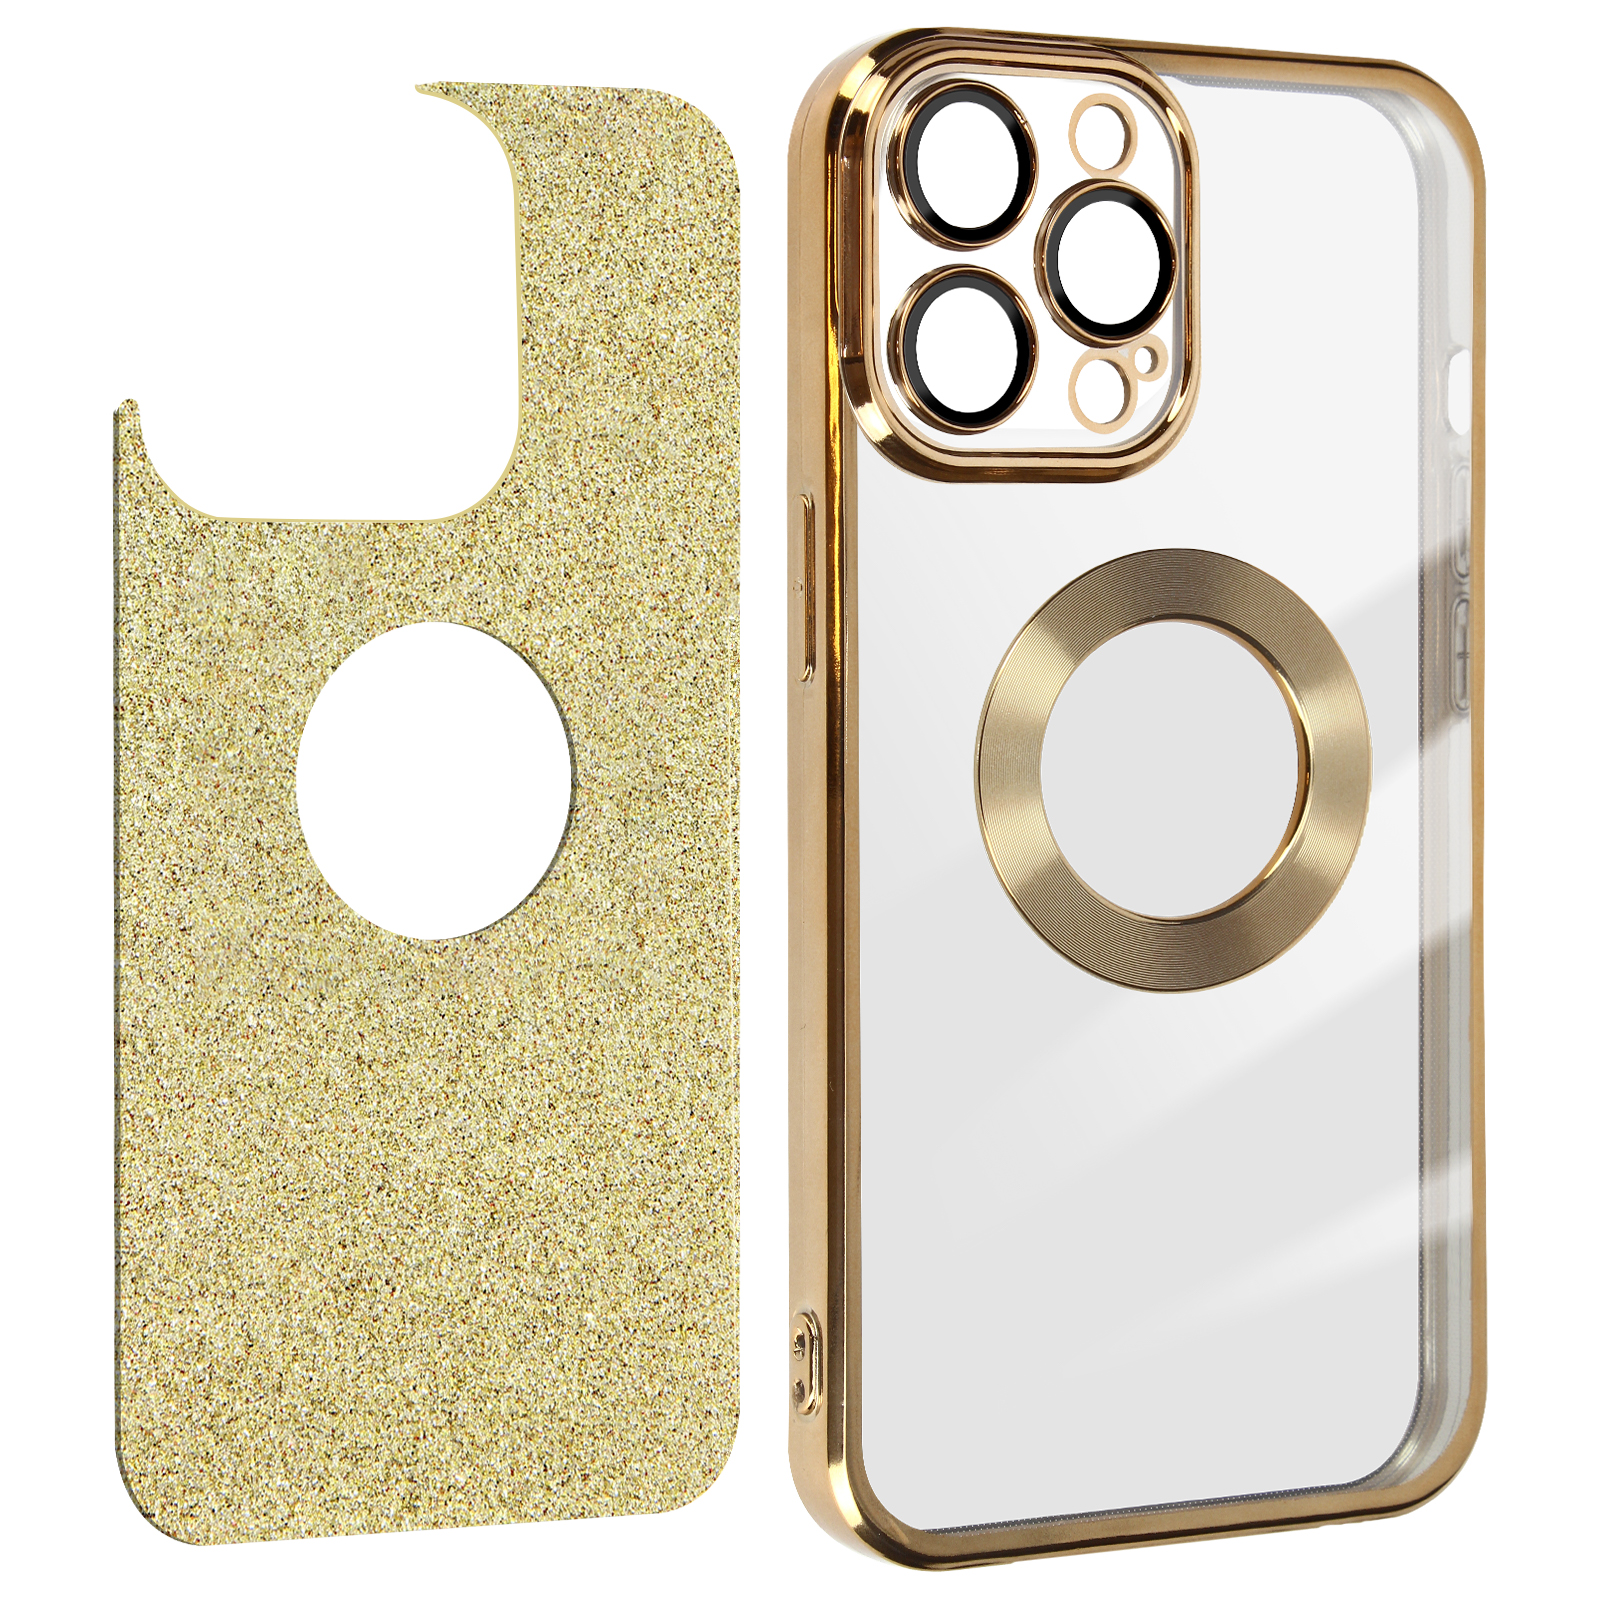 Max, Protecam Pro iPhone Spark 12 Apple, Gold AVIZAR Series, Backcover,